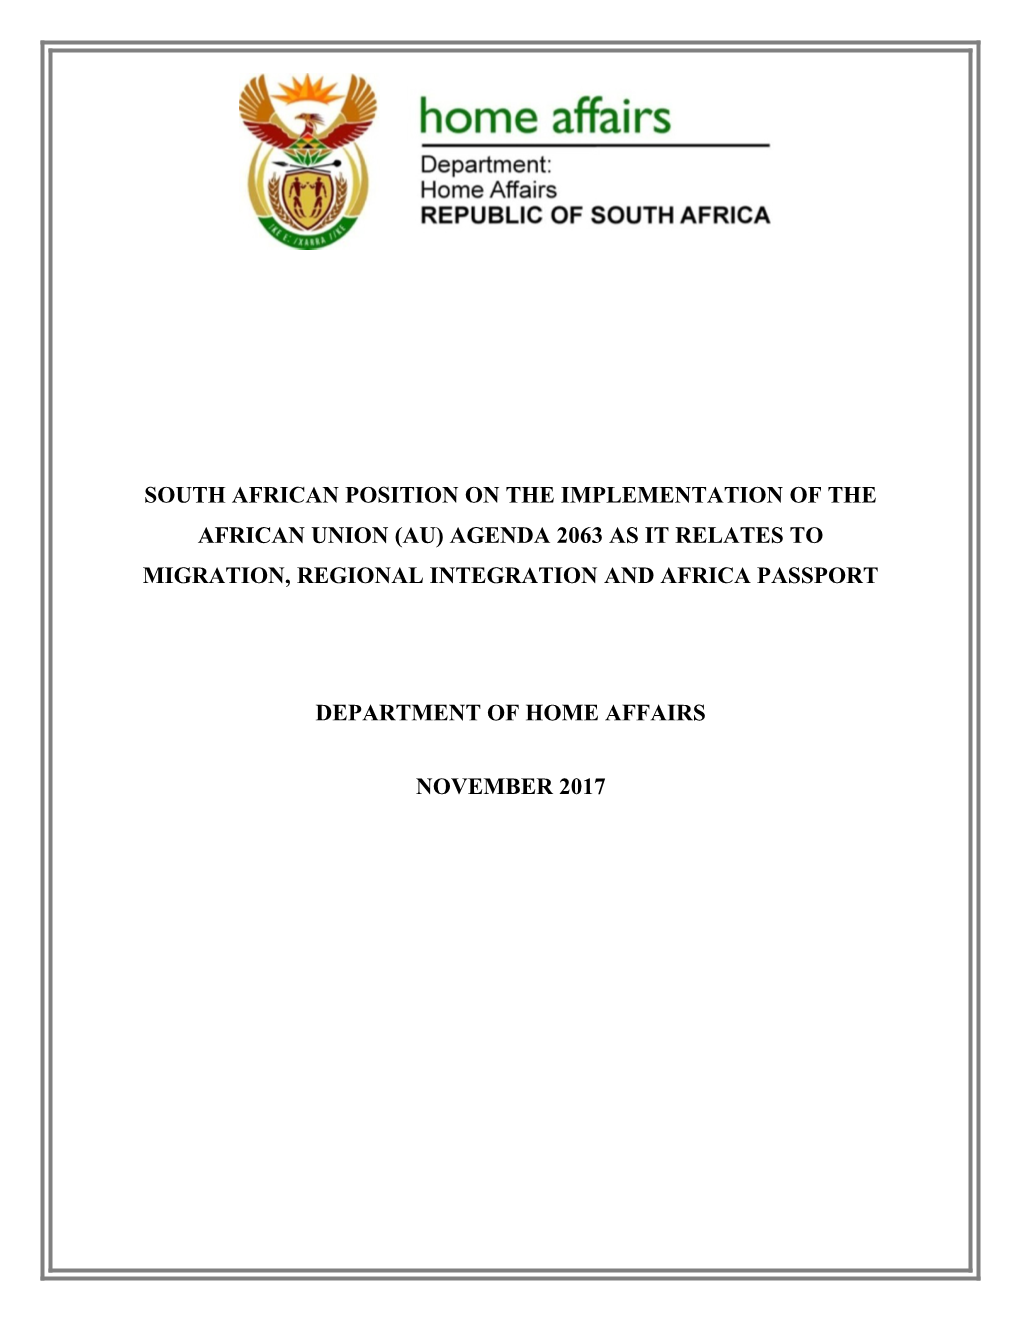 South African Position on the Implementation of the African Union (Au) Agenda 2063As It